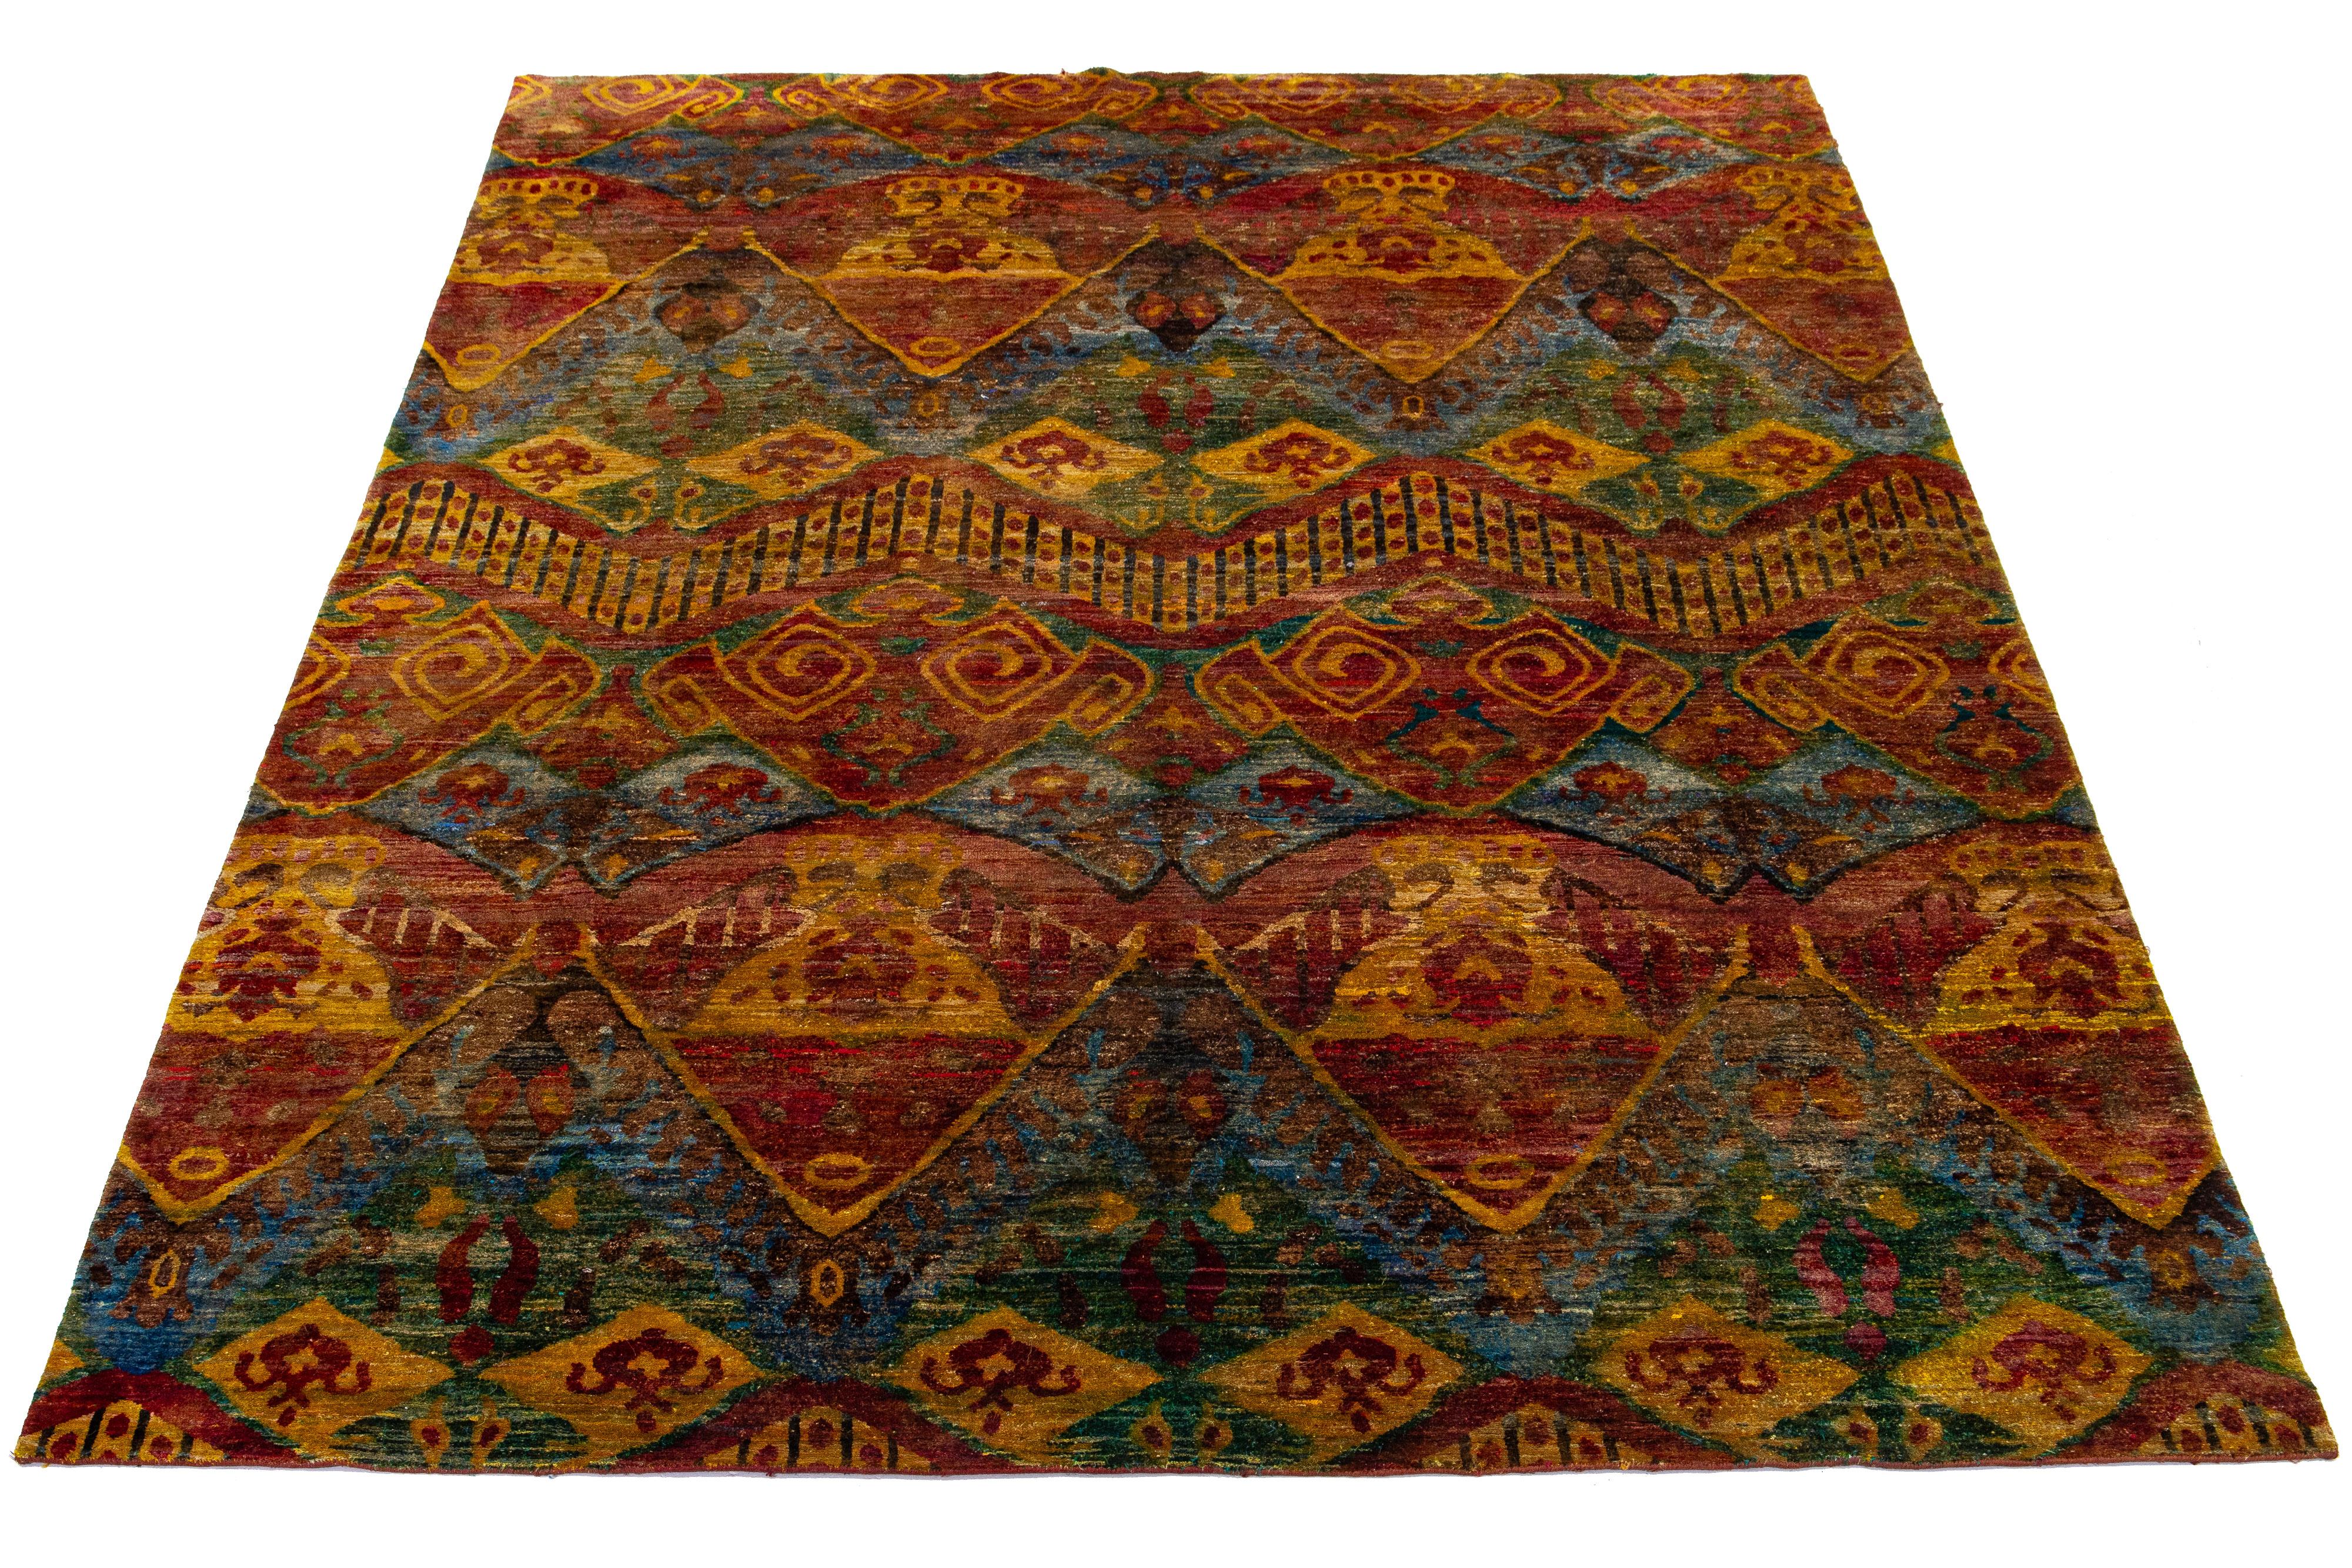 This hand-knotted wool and sari silk Bidjar Style rug showcases a rust-colored field. It is designed with a stunning geometric pattern and is accented with golden, blue, green, and brown hues, adding a modern allure.

This rug measures 10' x 14'2